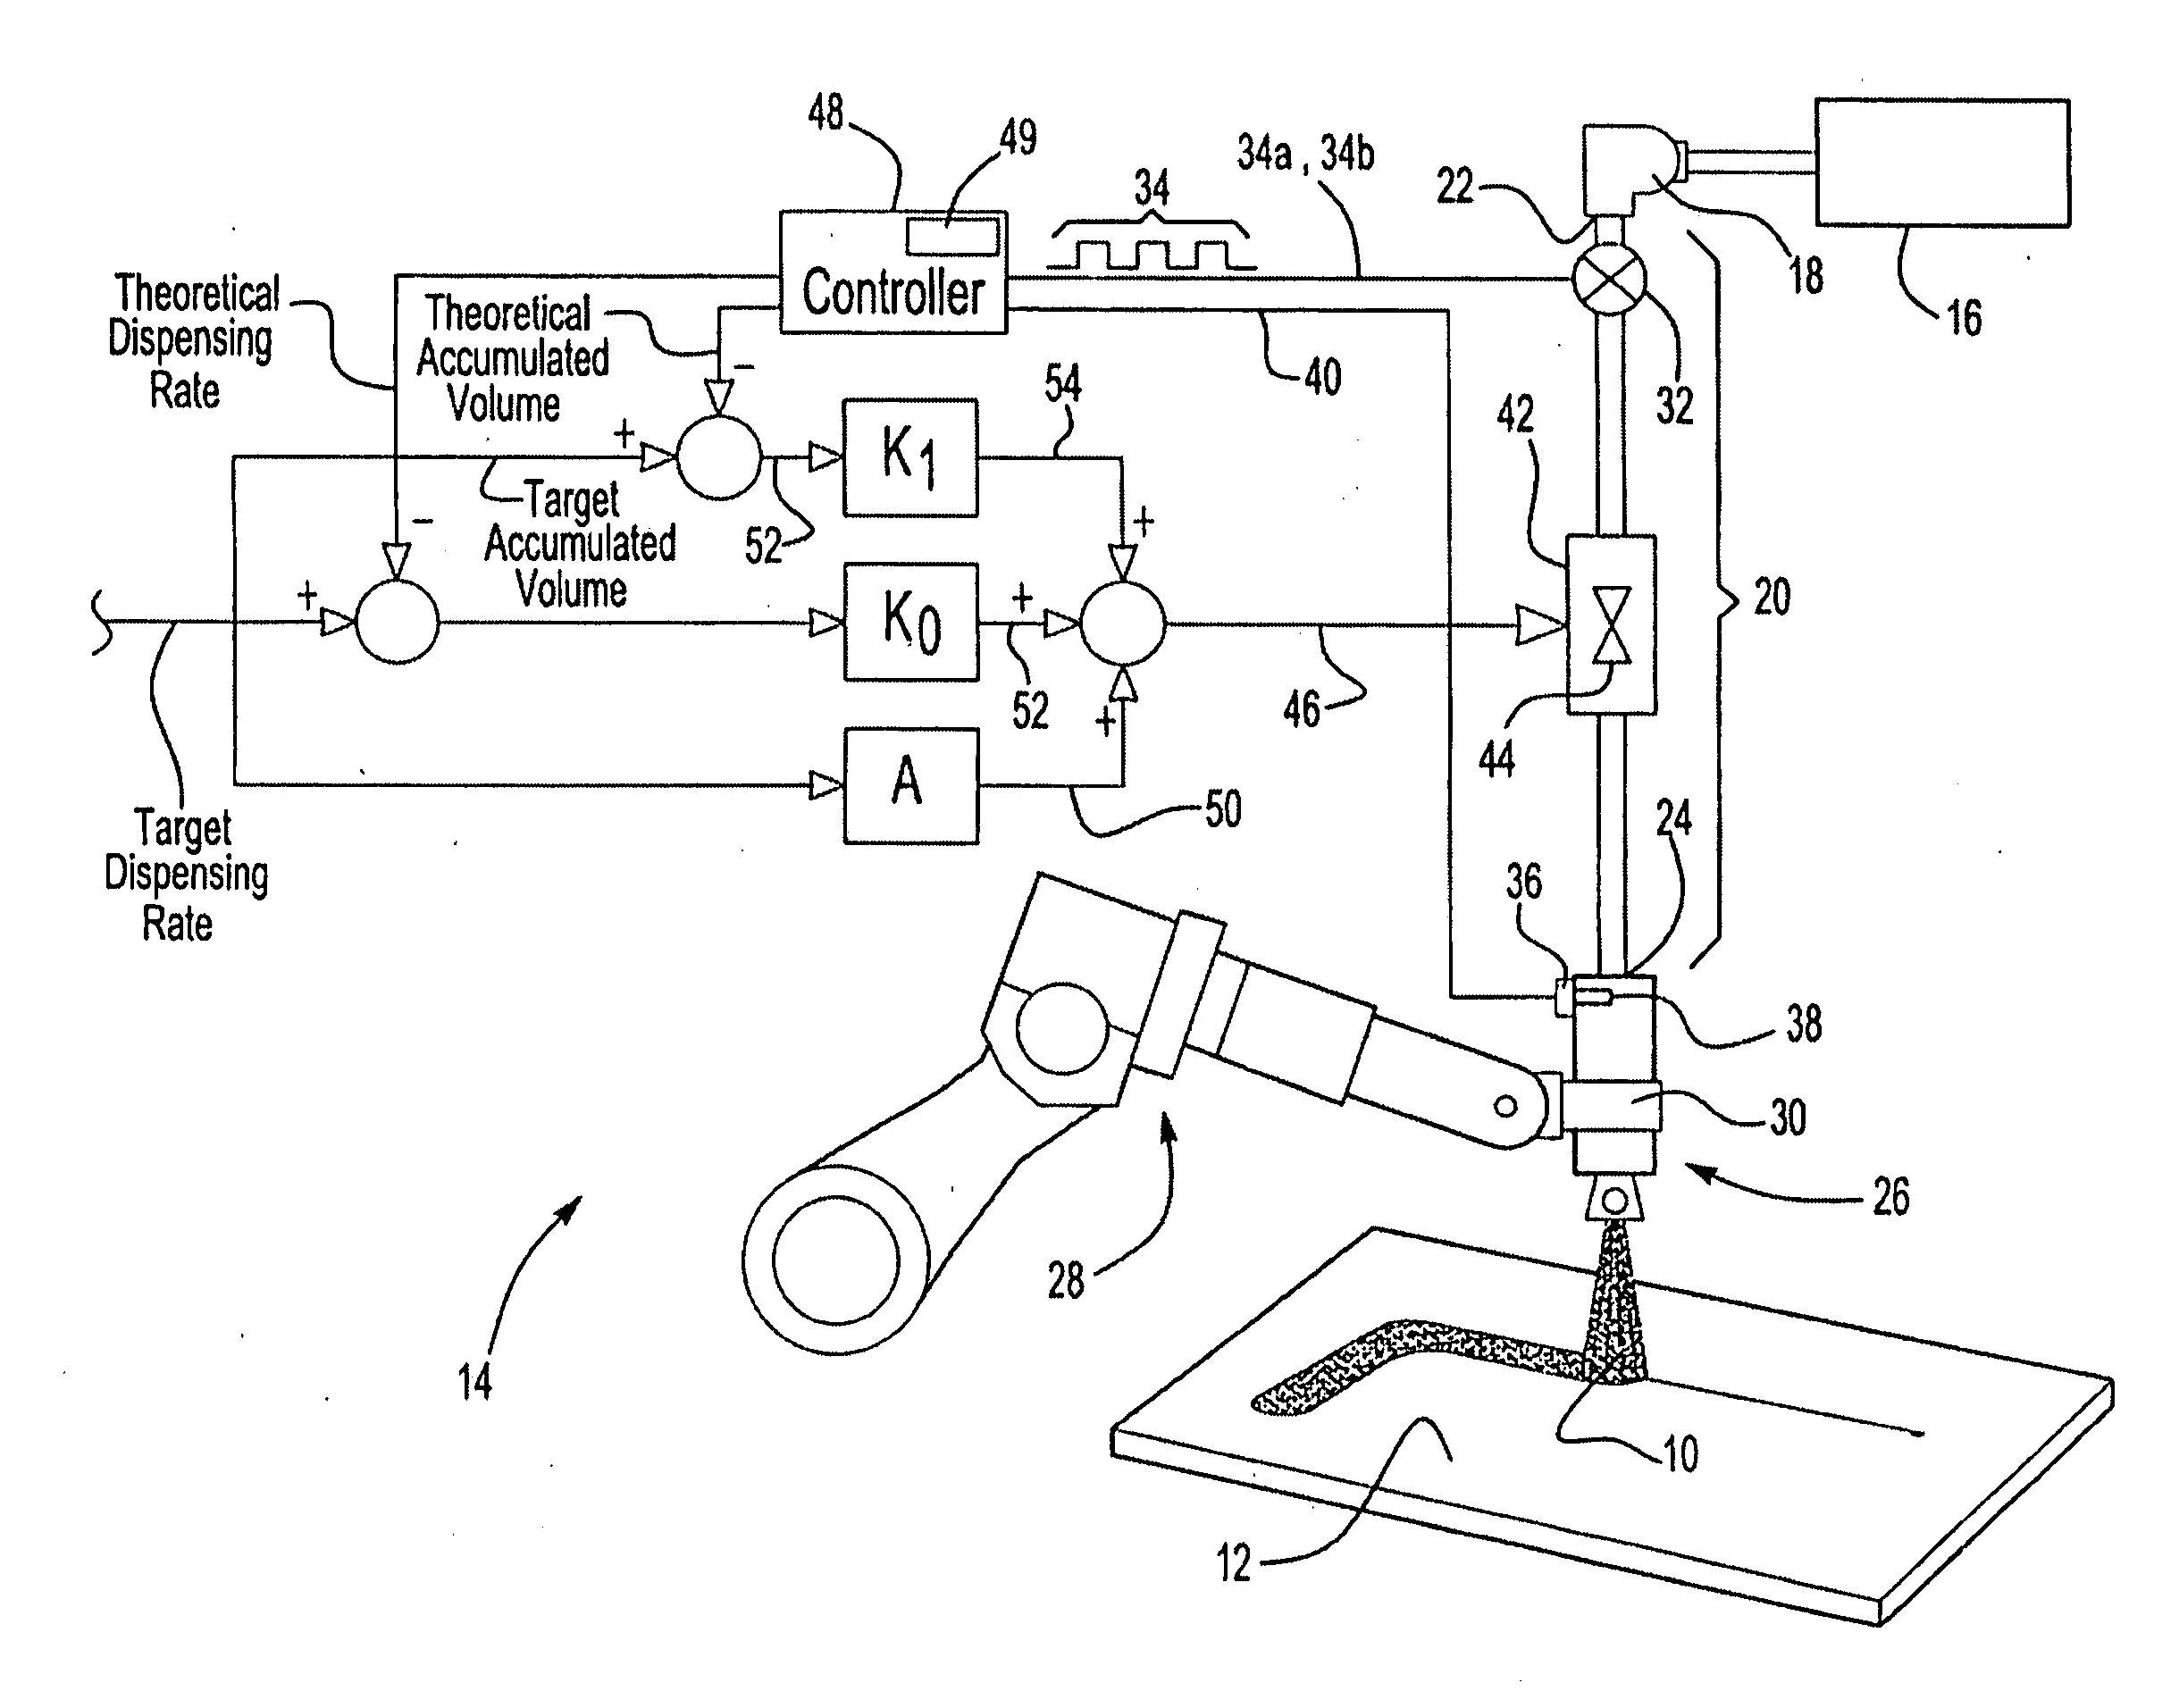 Control and system for dispensing fluid material